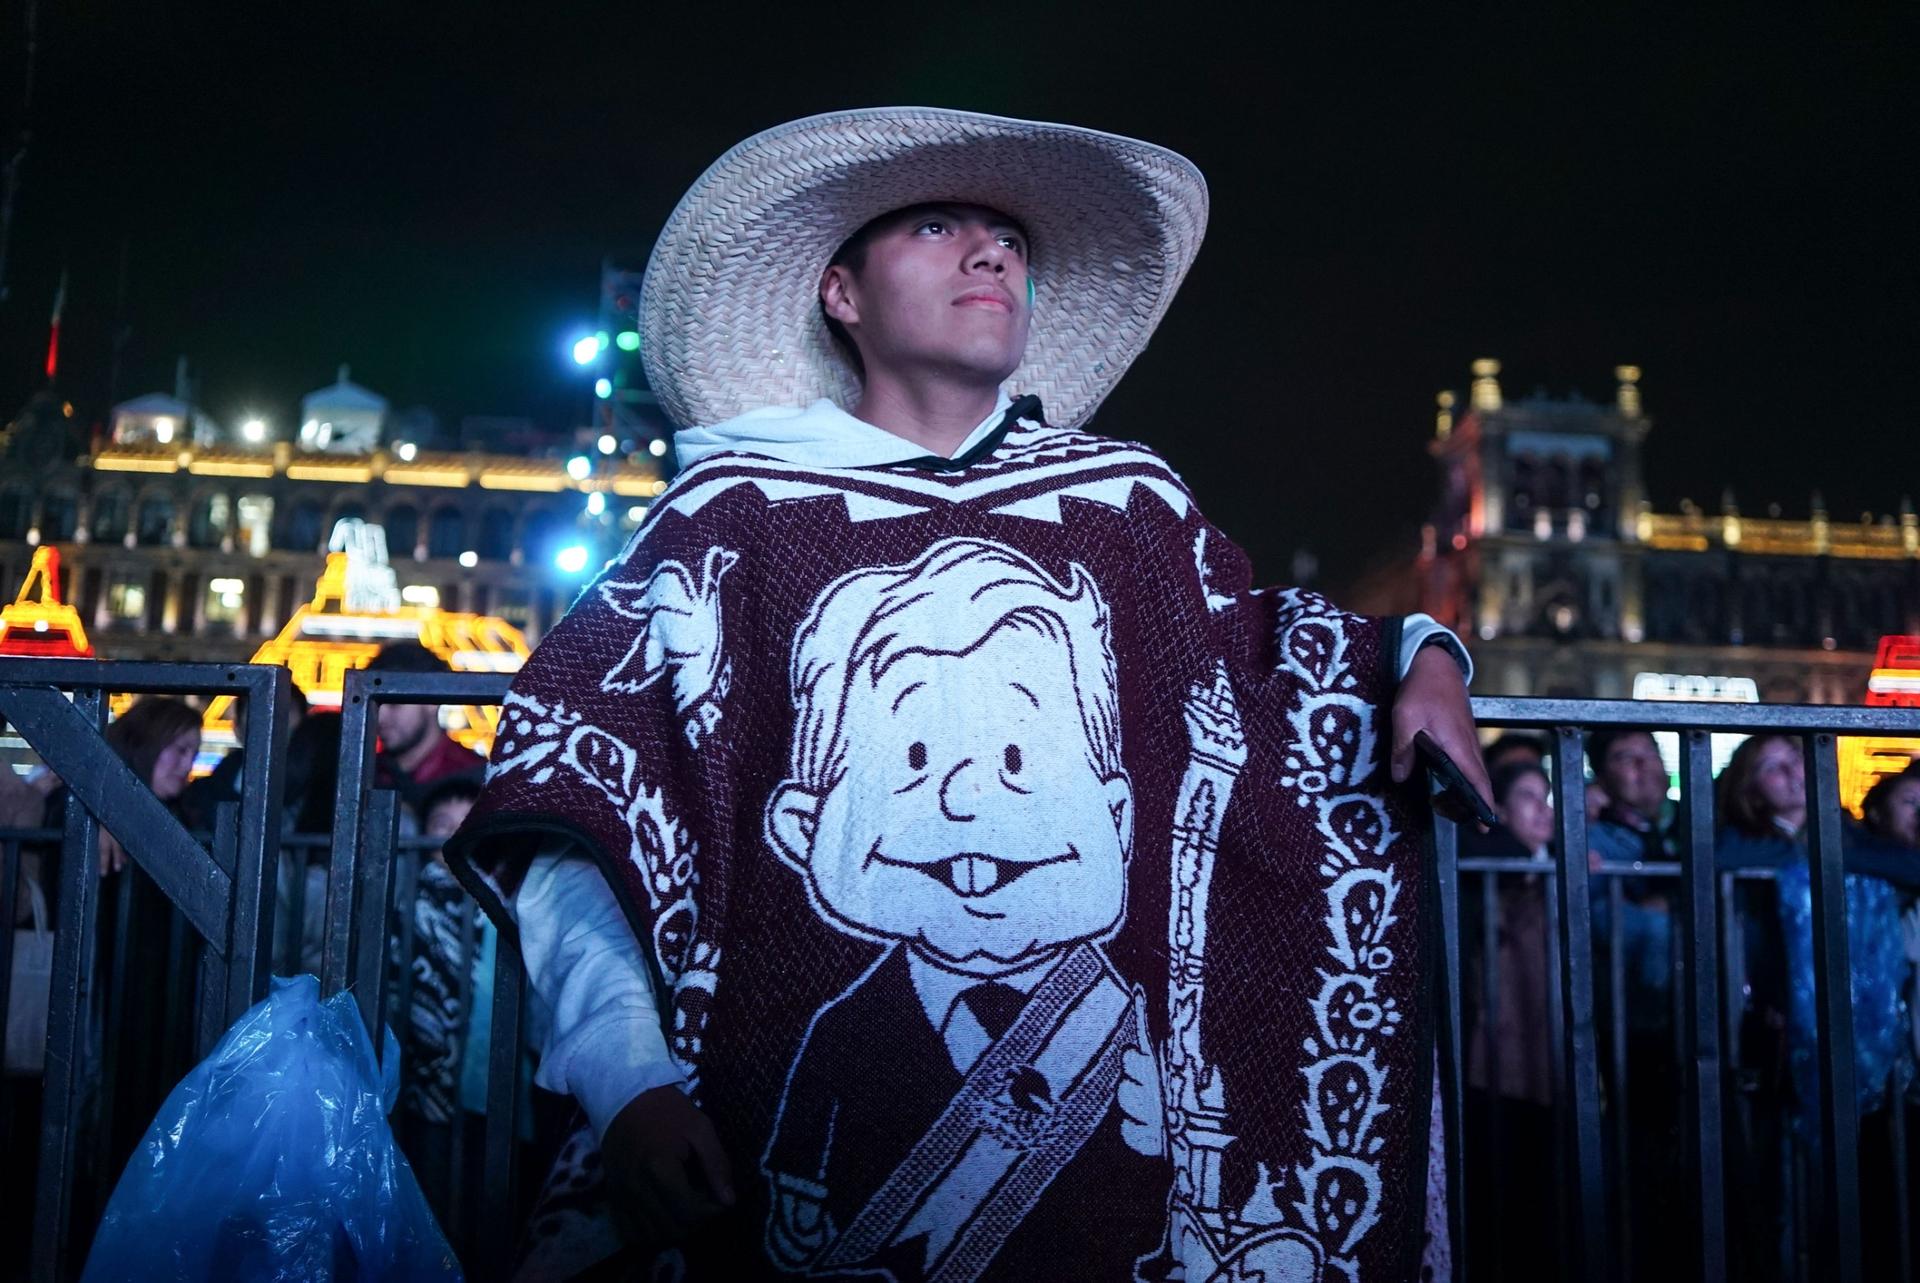 A young man watches a performance during a celebration of Mexican Independence Day.